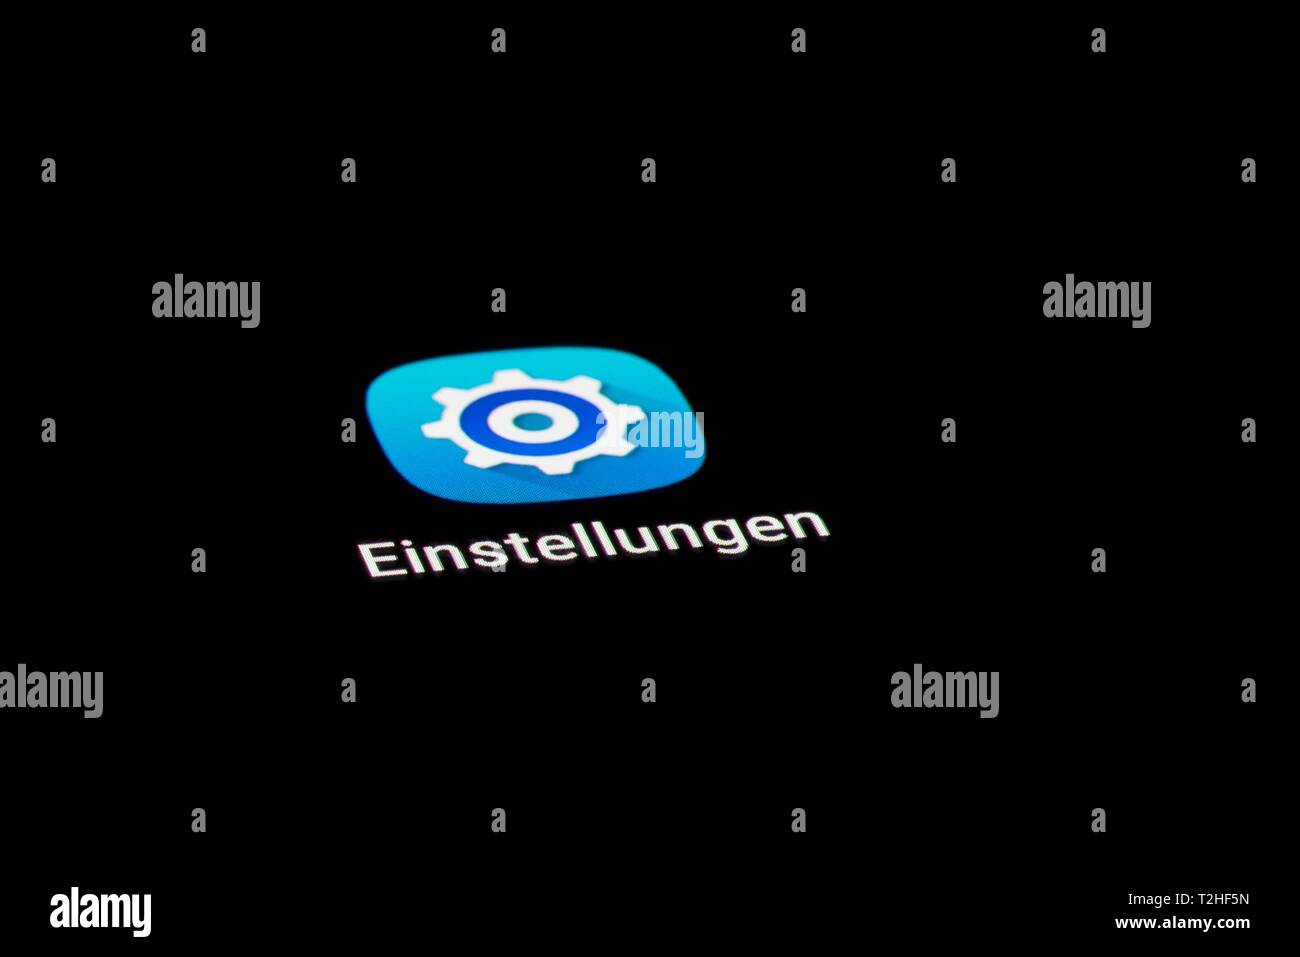 Settings App icon on a display, mobile phone, smartphone, tablet, Germany Stock Photo